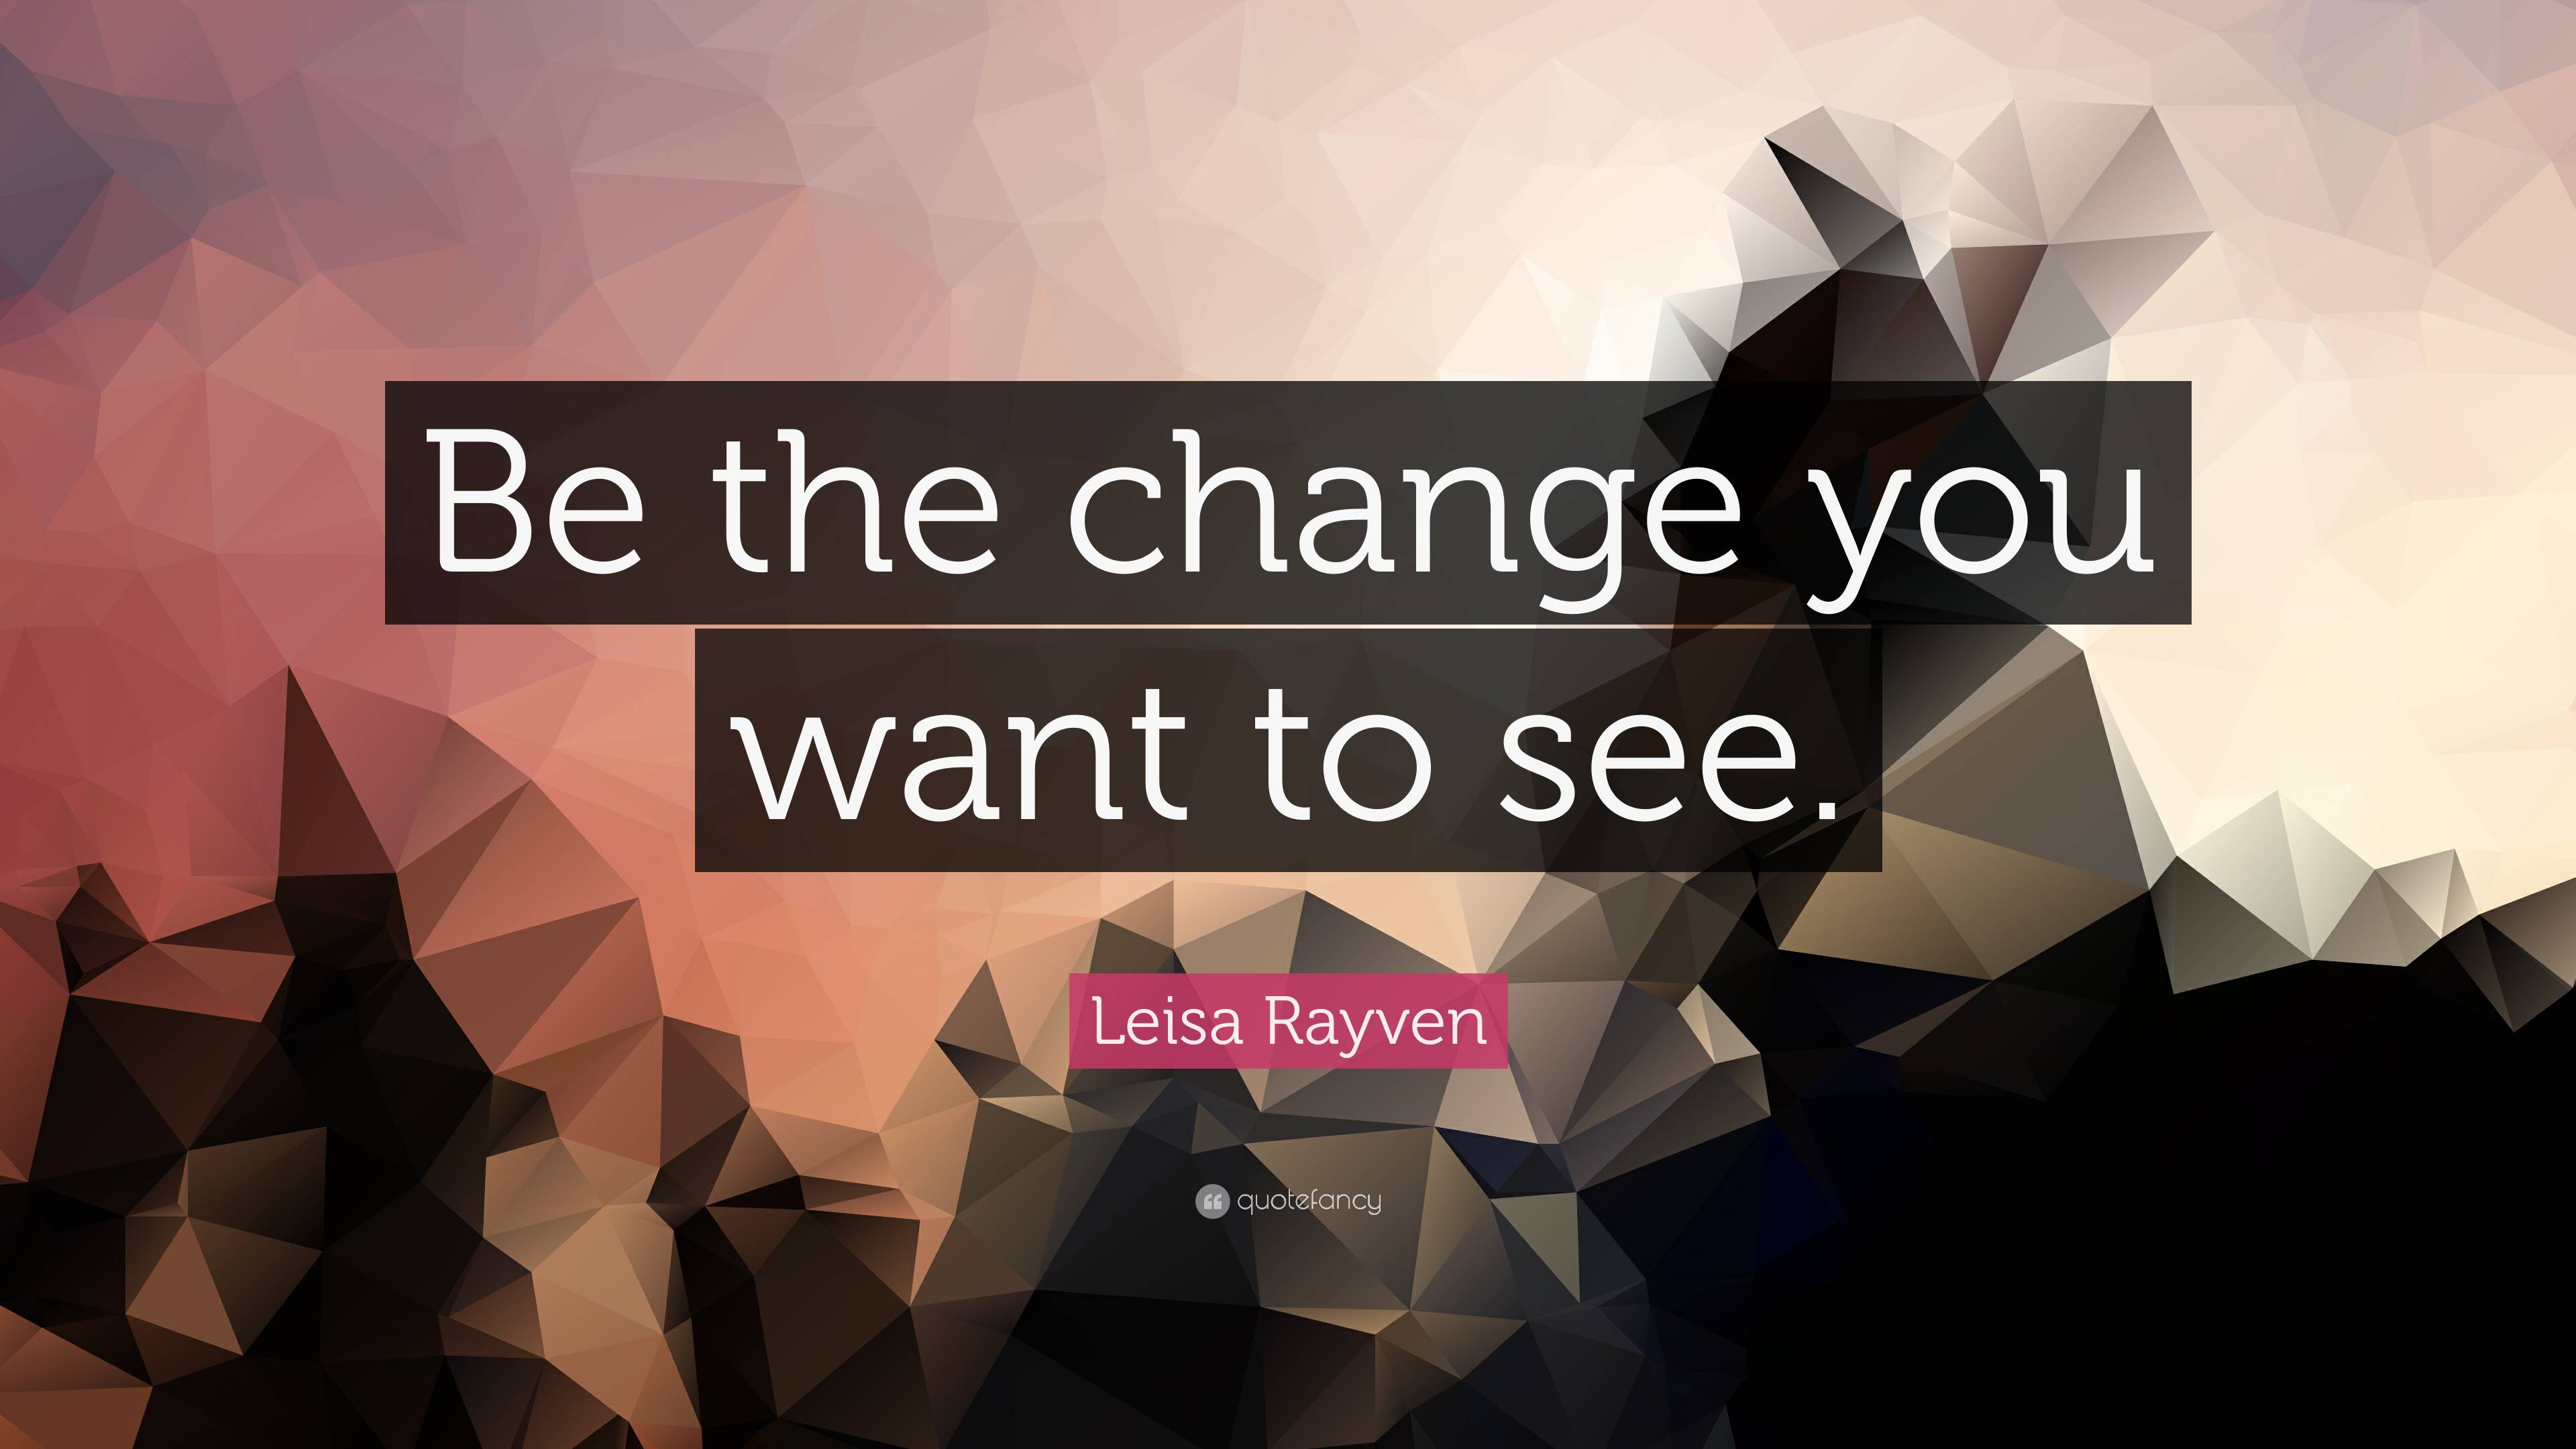 Leisa Rayven Quote: “Be the change you want to see.”